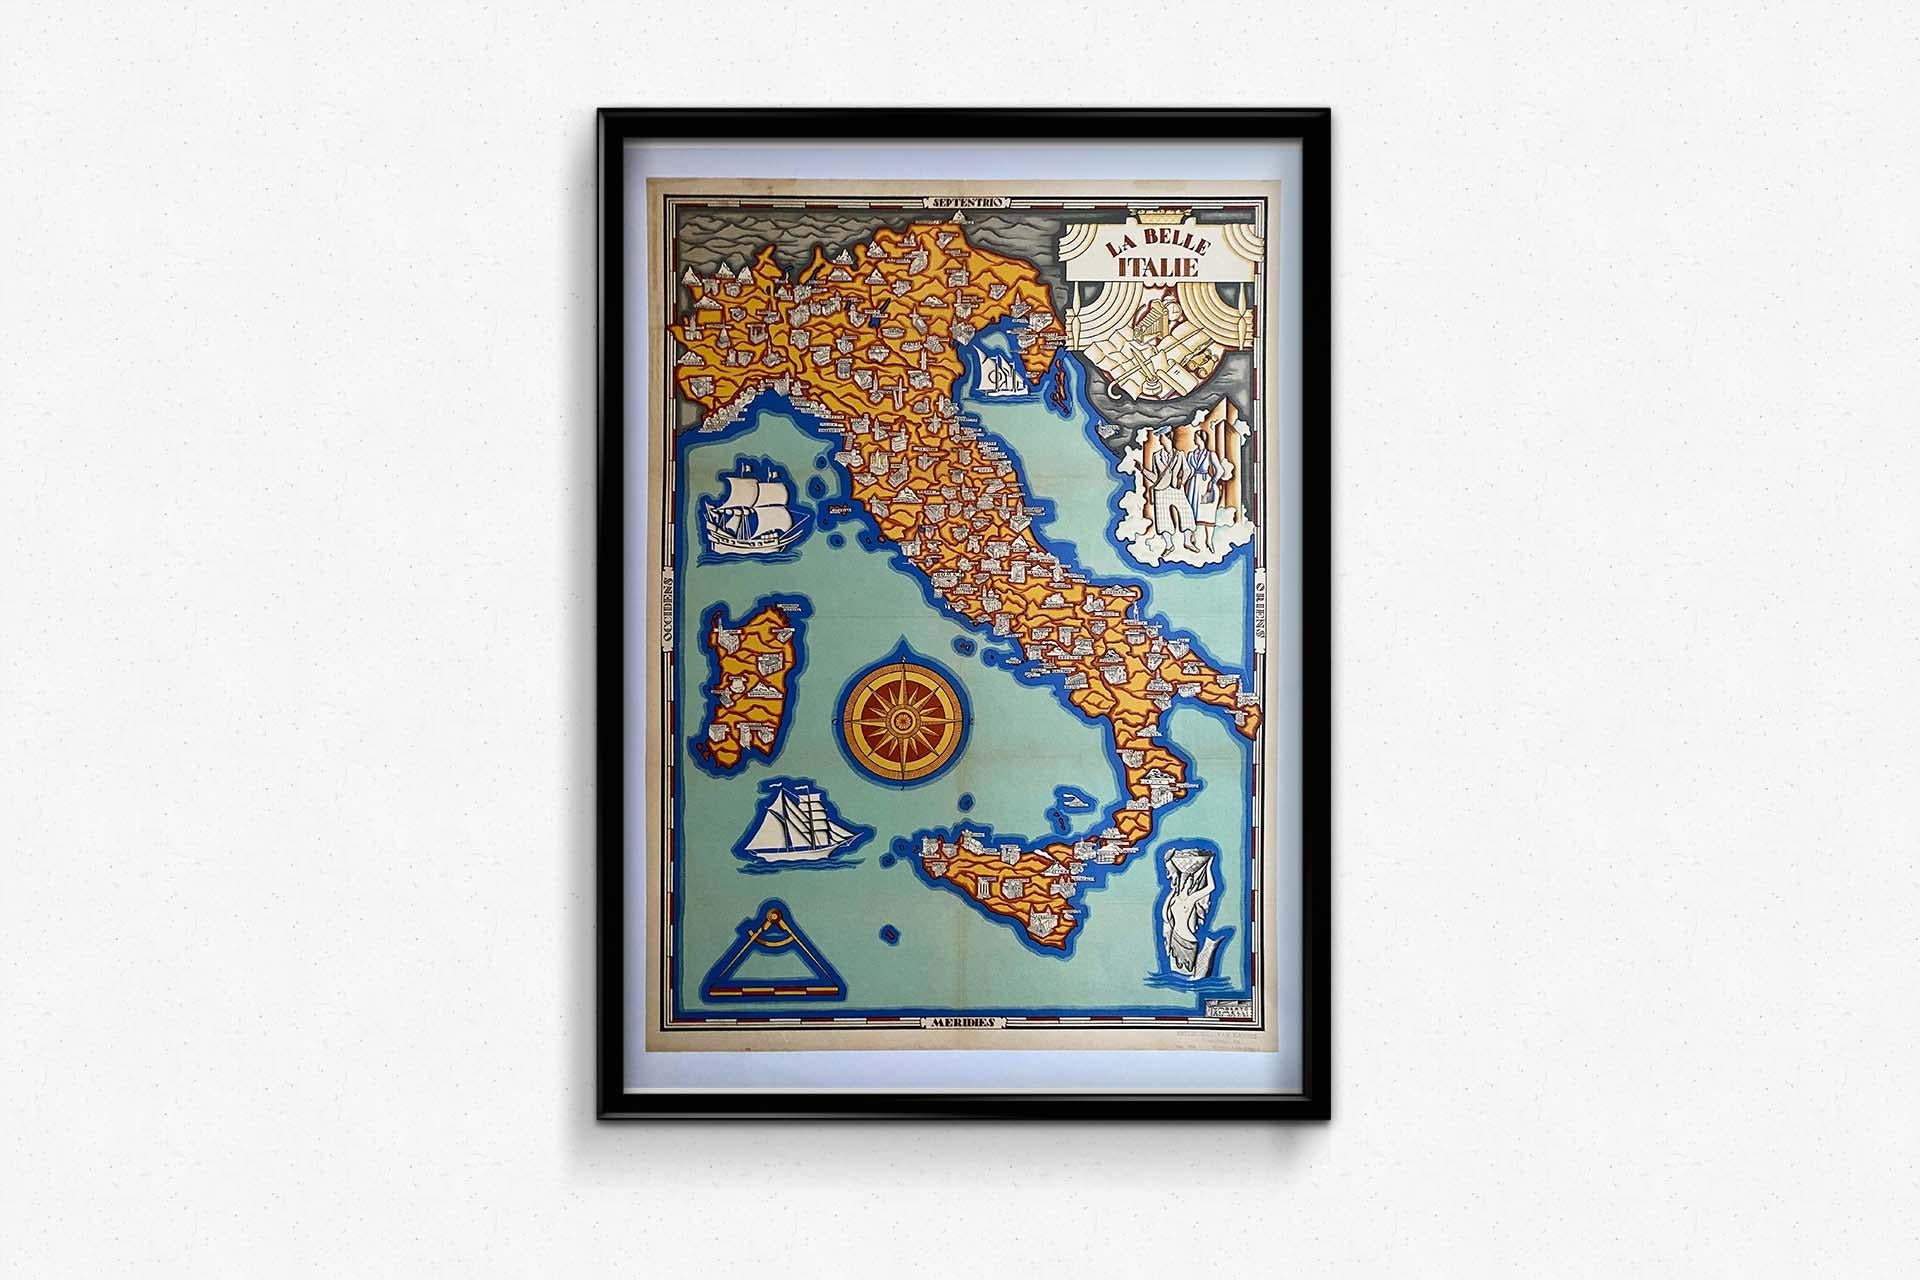 Very nice illustrated map of Italy dating from 1933.

Italy - Tourism